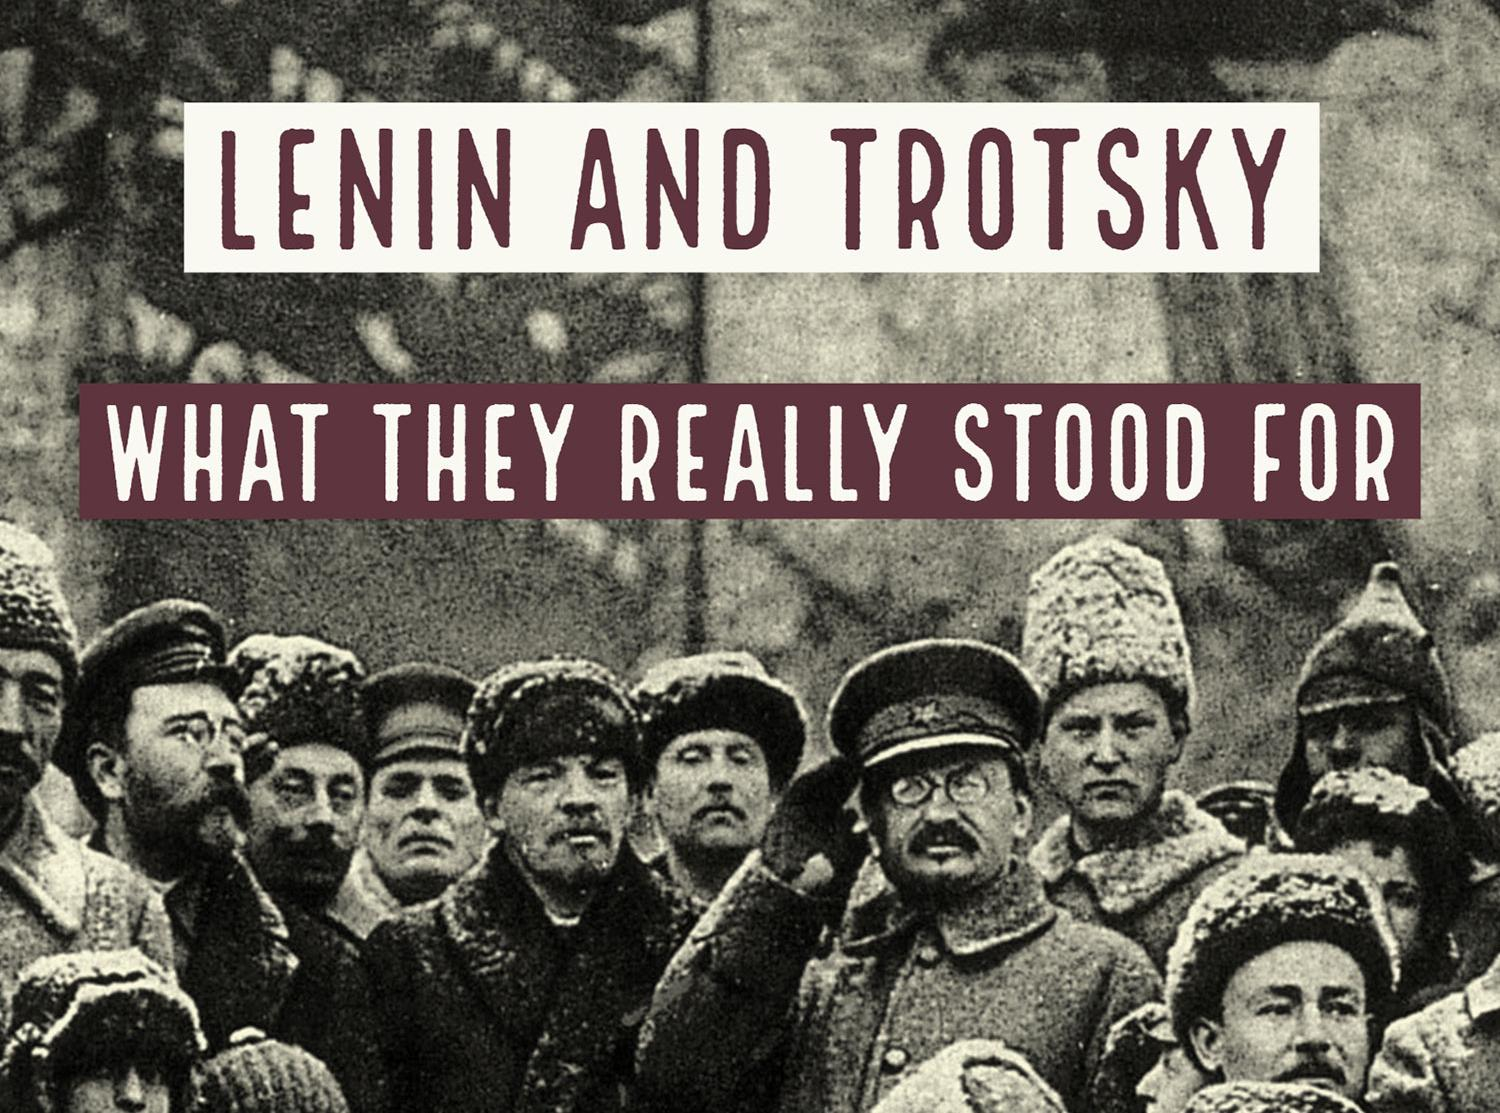 Book] Lenin and Trotsky - What they really stood for | Books | Announcements